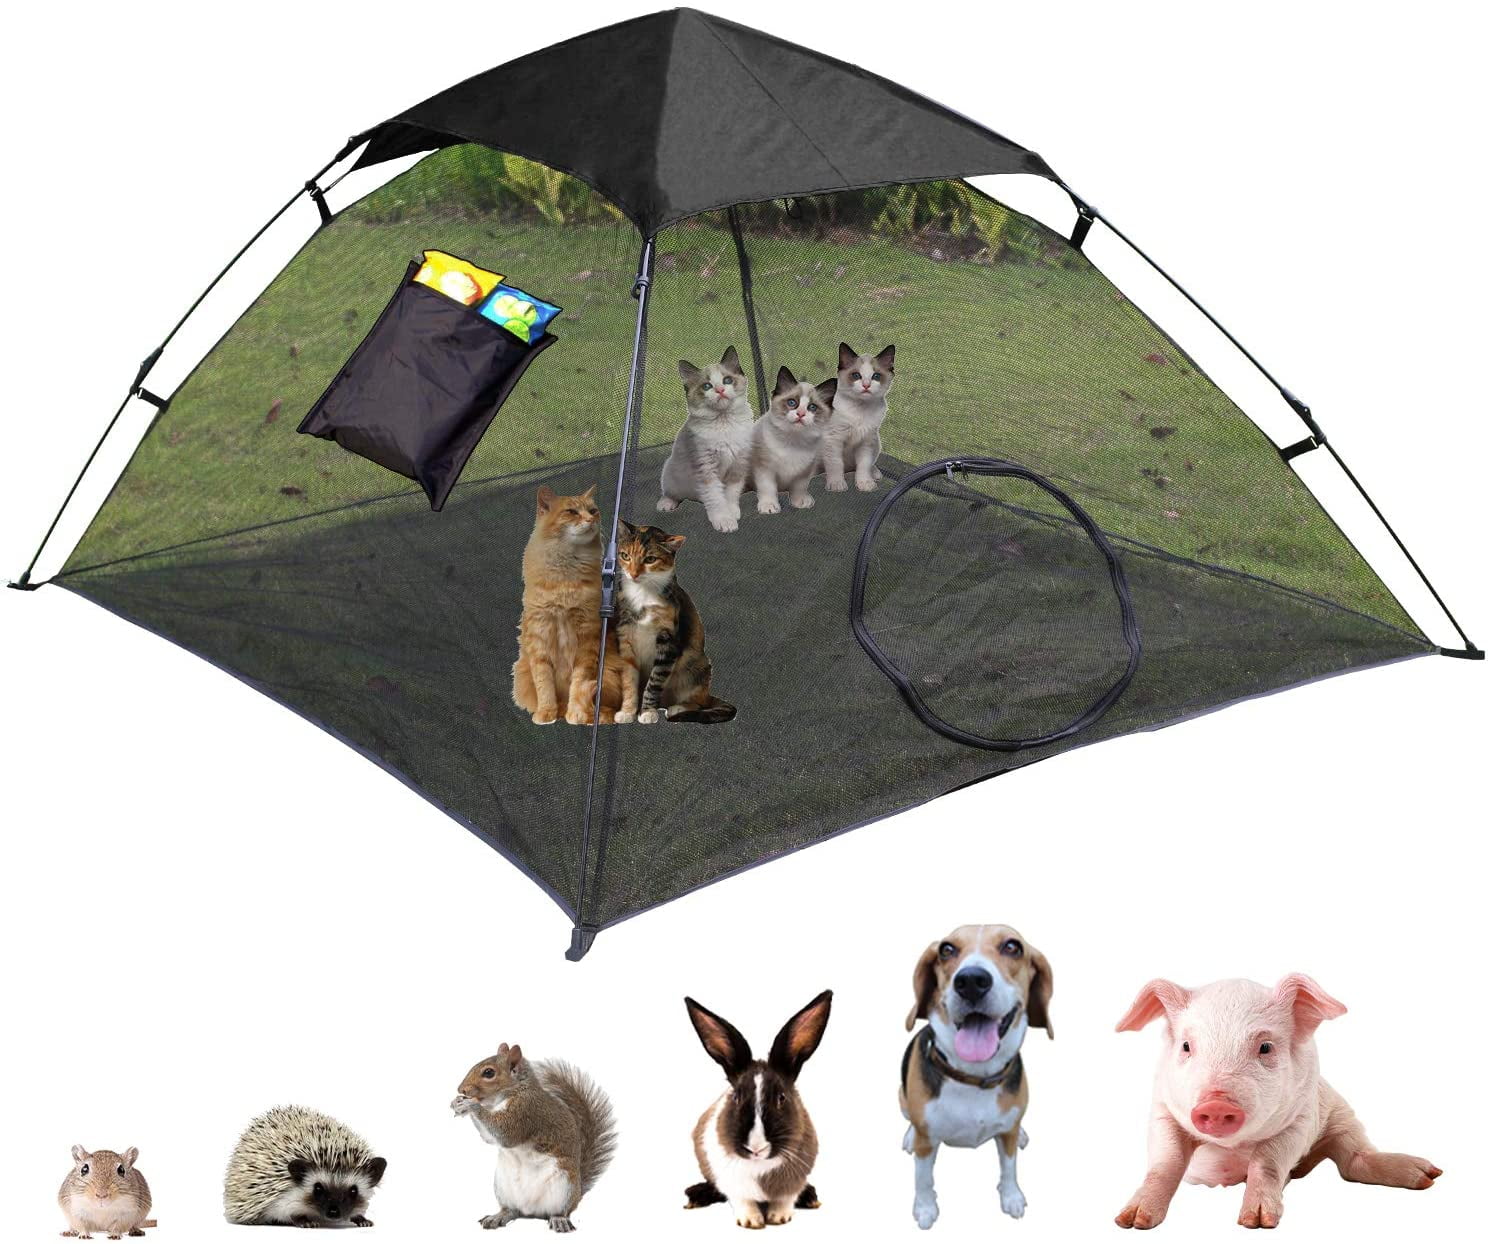 Fooubaby Cat Tent Pop Up Cat House Outside Pet Enclosure Tent Indoor Playpen Portable for Cats Small Dogs in Deck Travel Outdoor in Summer Patio Park Yard Camping 